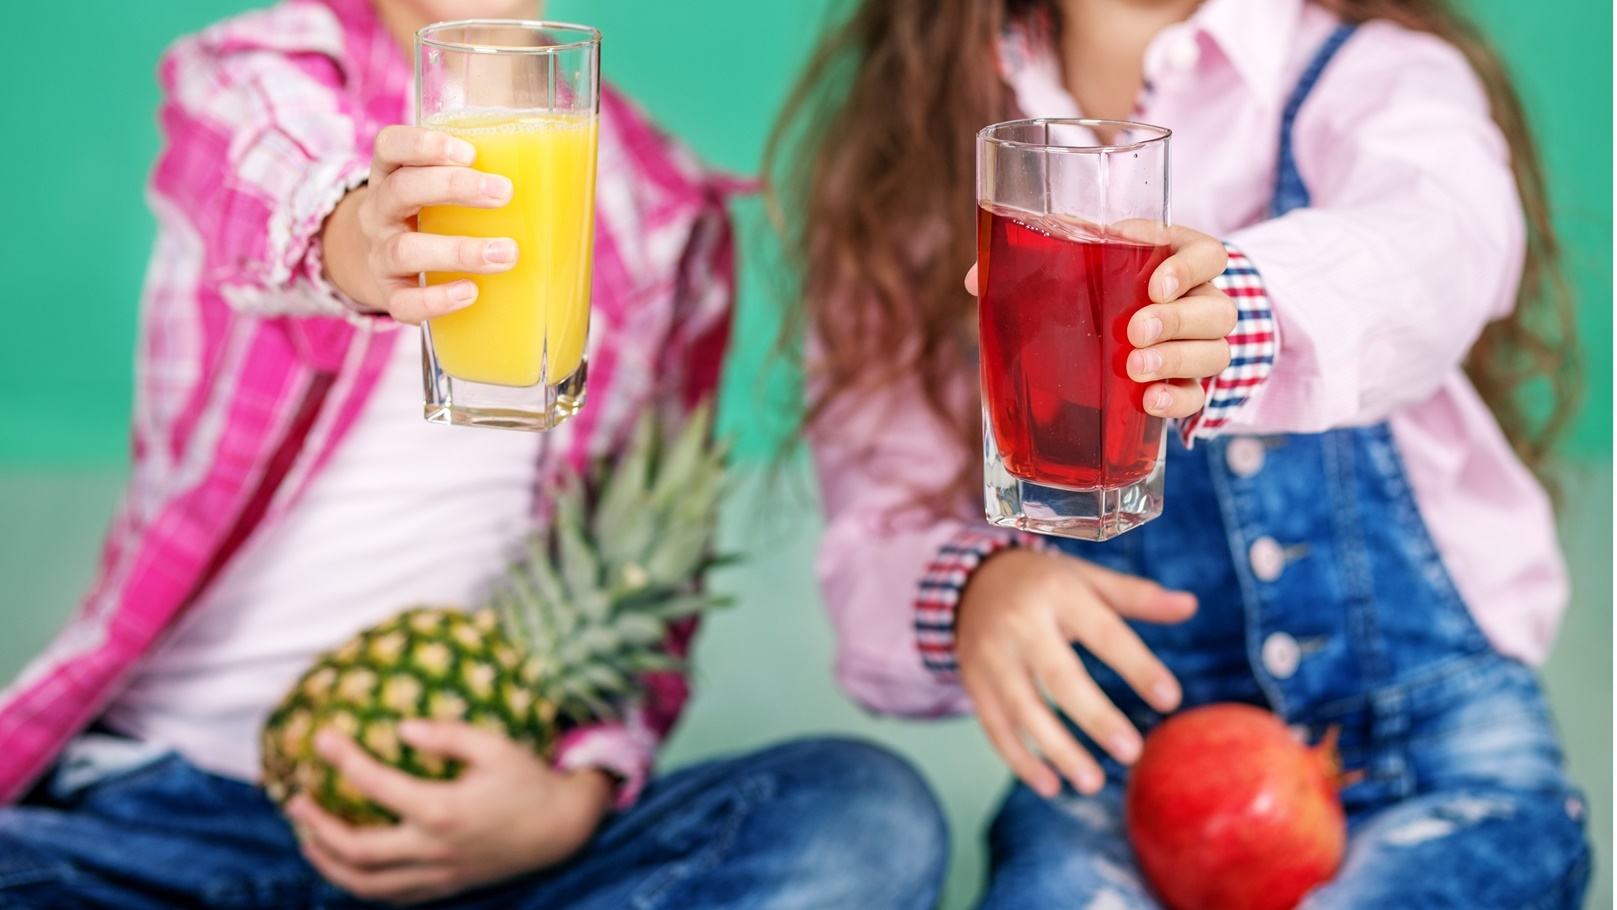 children-with-fruit-juice-and-pineapple-and-pomegr-2022-01-27-23-40-50-utc